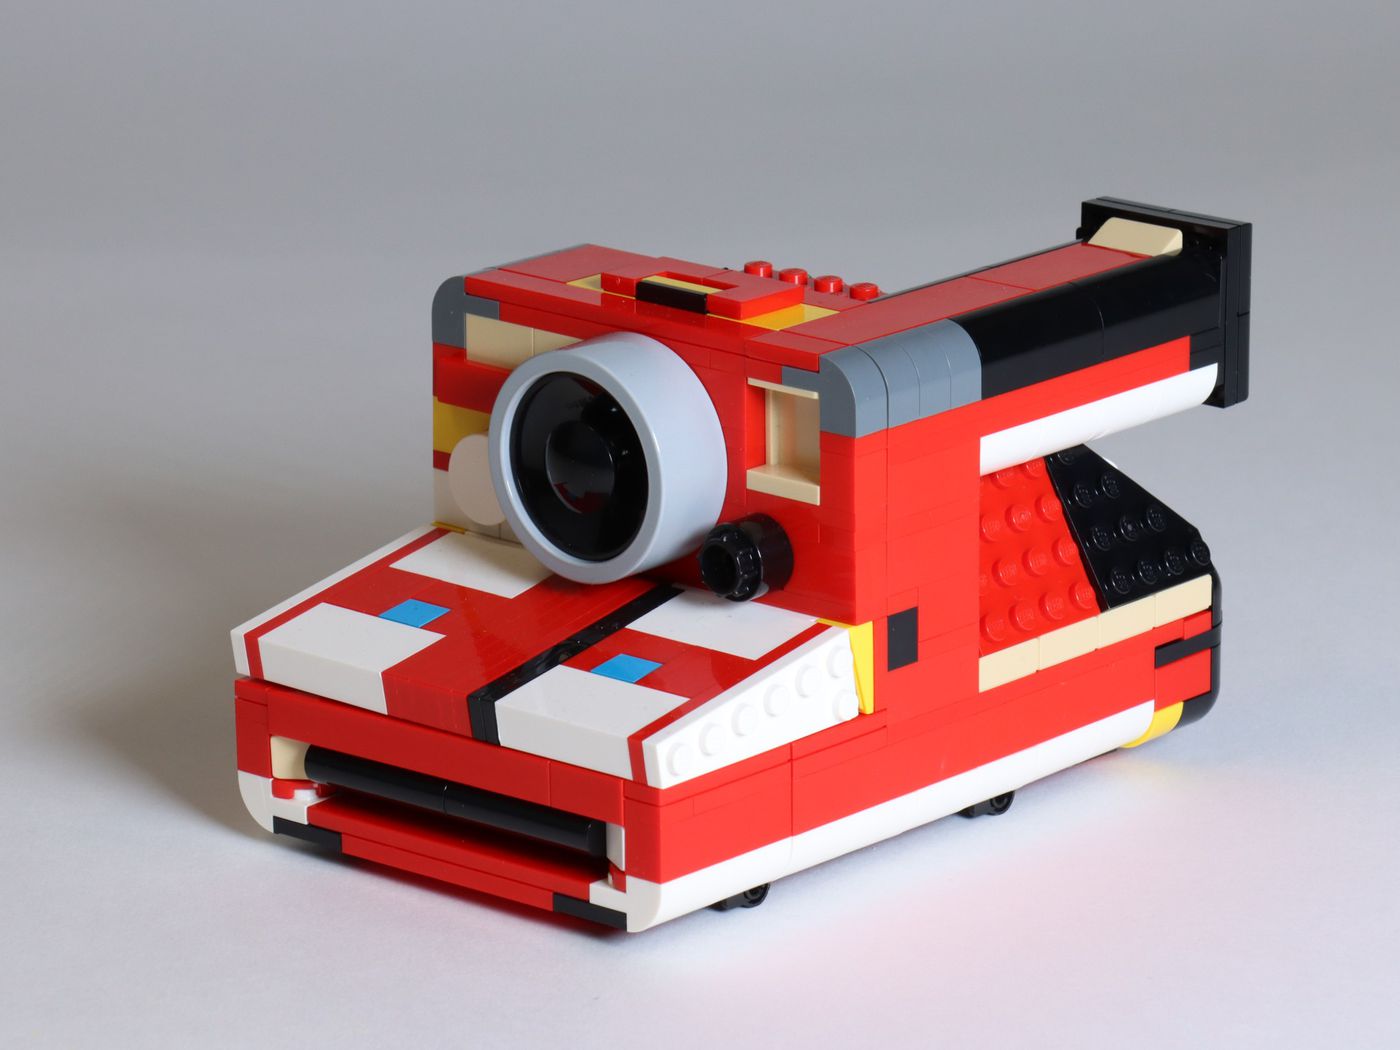 This particular red, gray, black, white, and yellow Lego Polaroid prototype was made from the colors that were on hand.